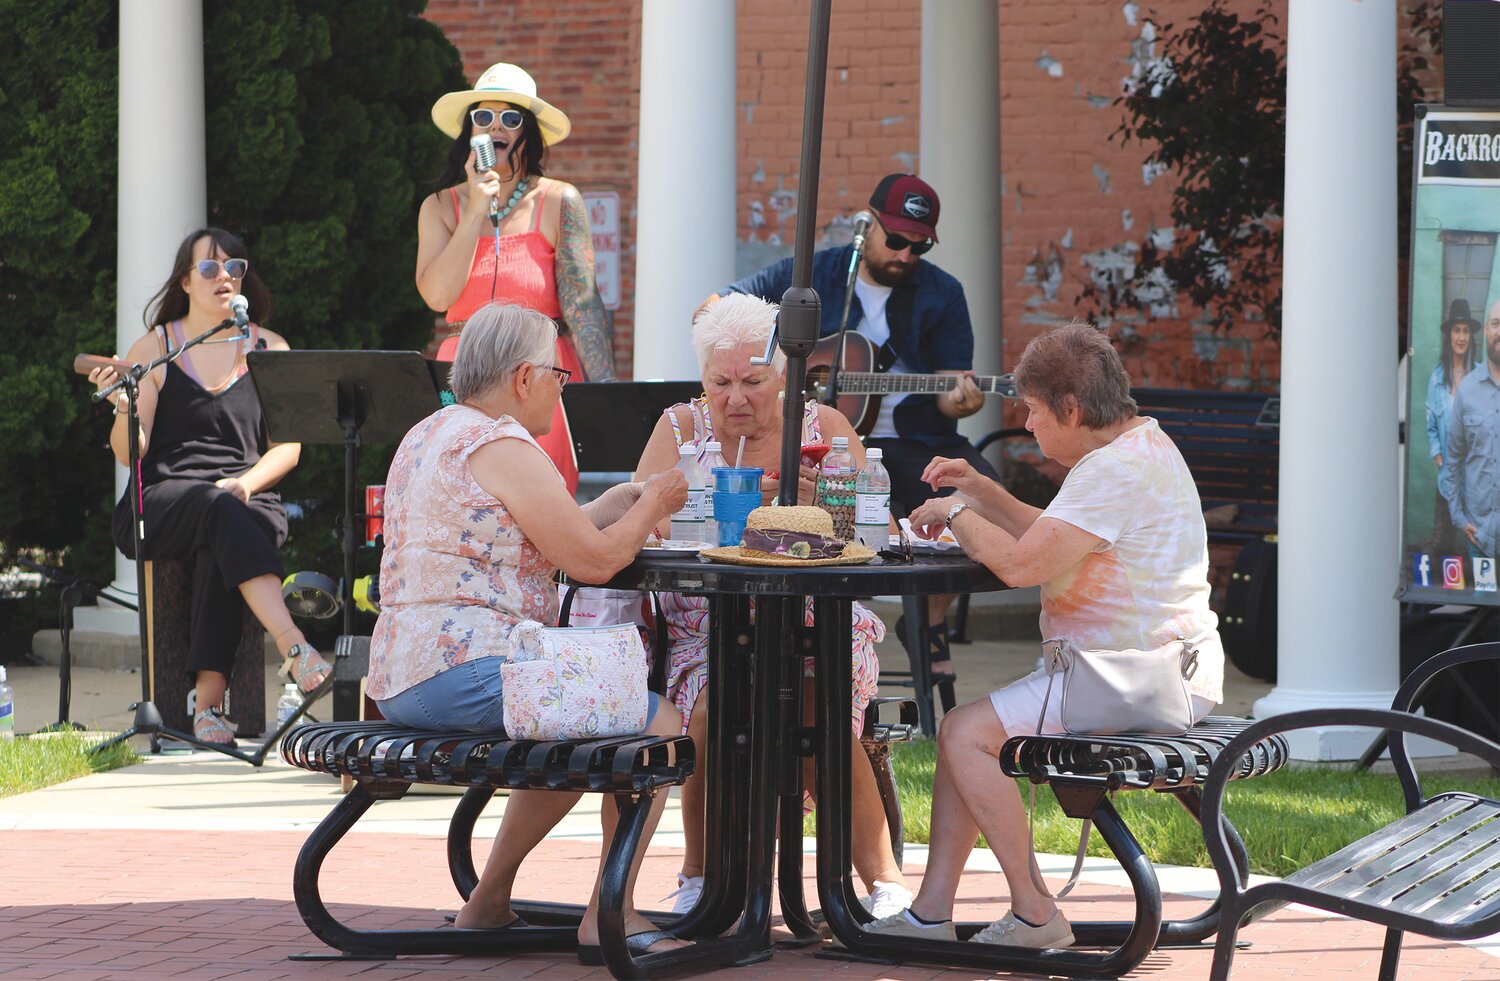 Volunteers serve lunch from China Inn while members of Backroad Revival entertain the crowd Friday at the Marie Canine Plaza. It was the first of three lunch events planned this summer by Crawfordsville Main Street.